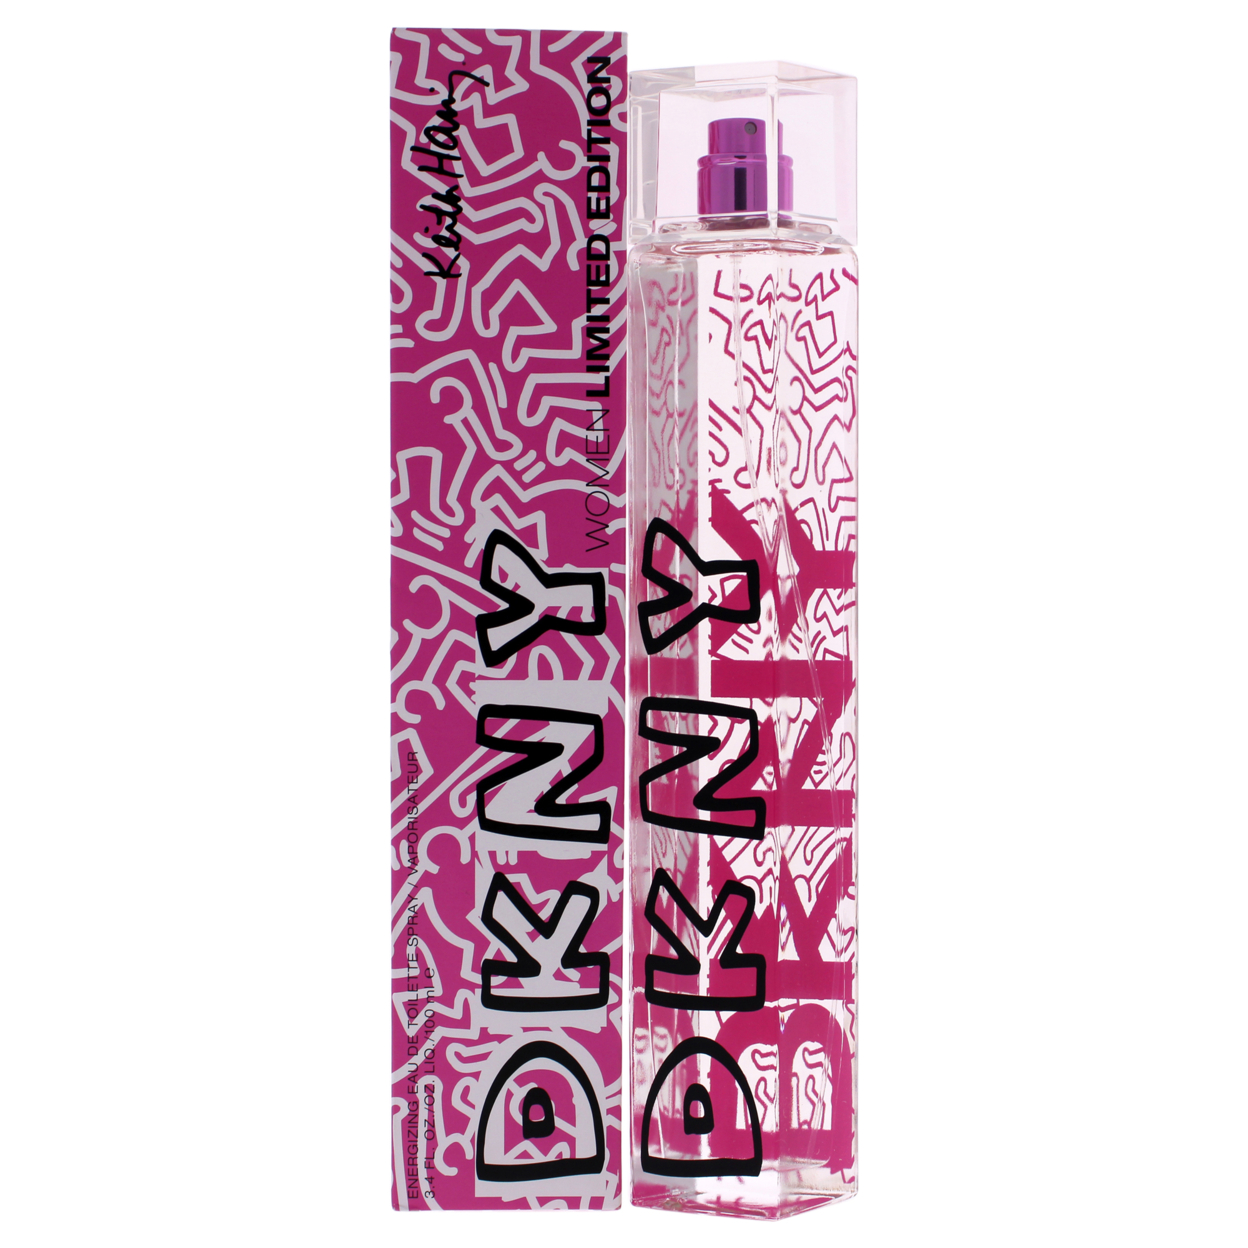 DKNY by Donna Karan Summer Limited Edition EDT 3.4 oz / 100 ml Women - image 1 of 3